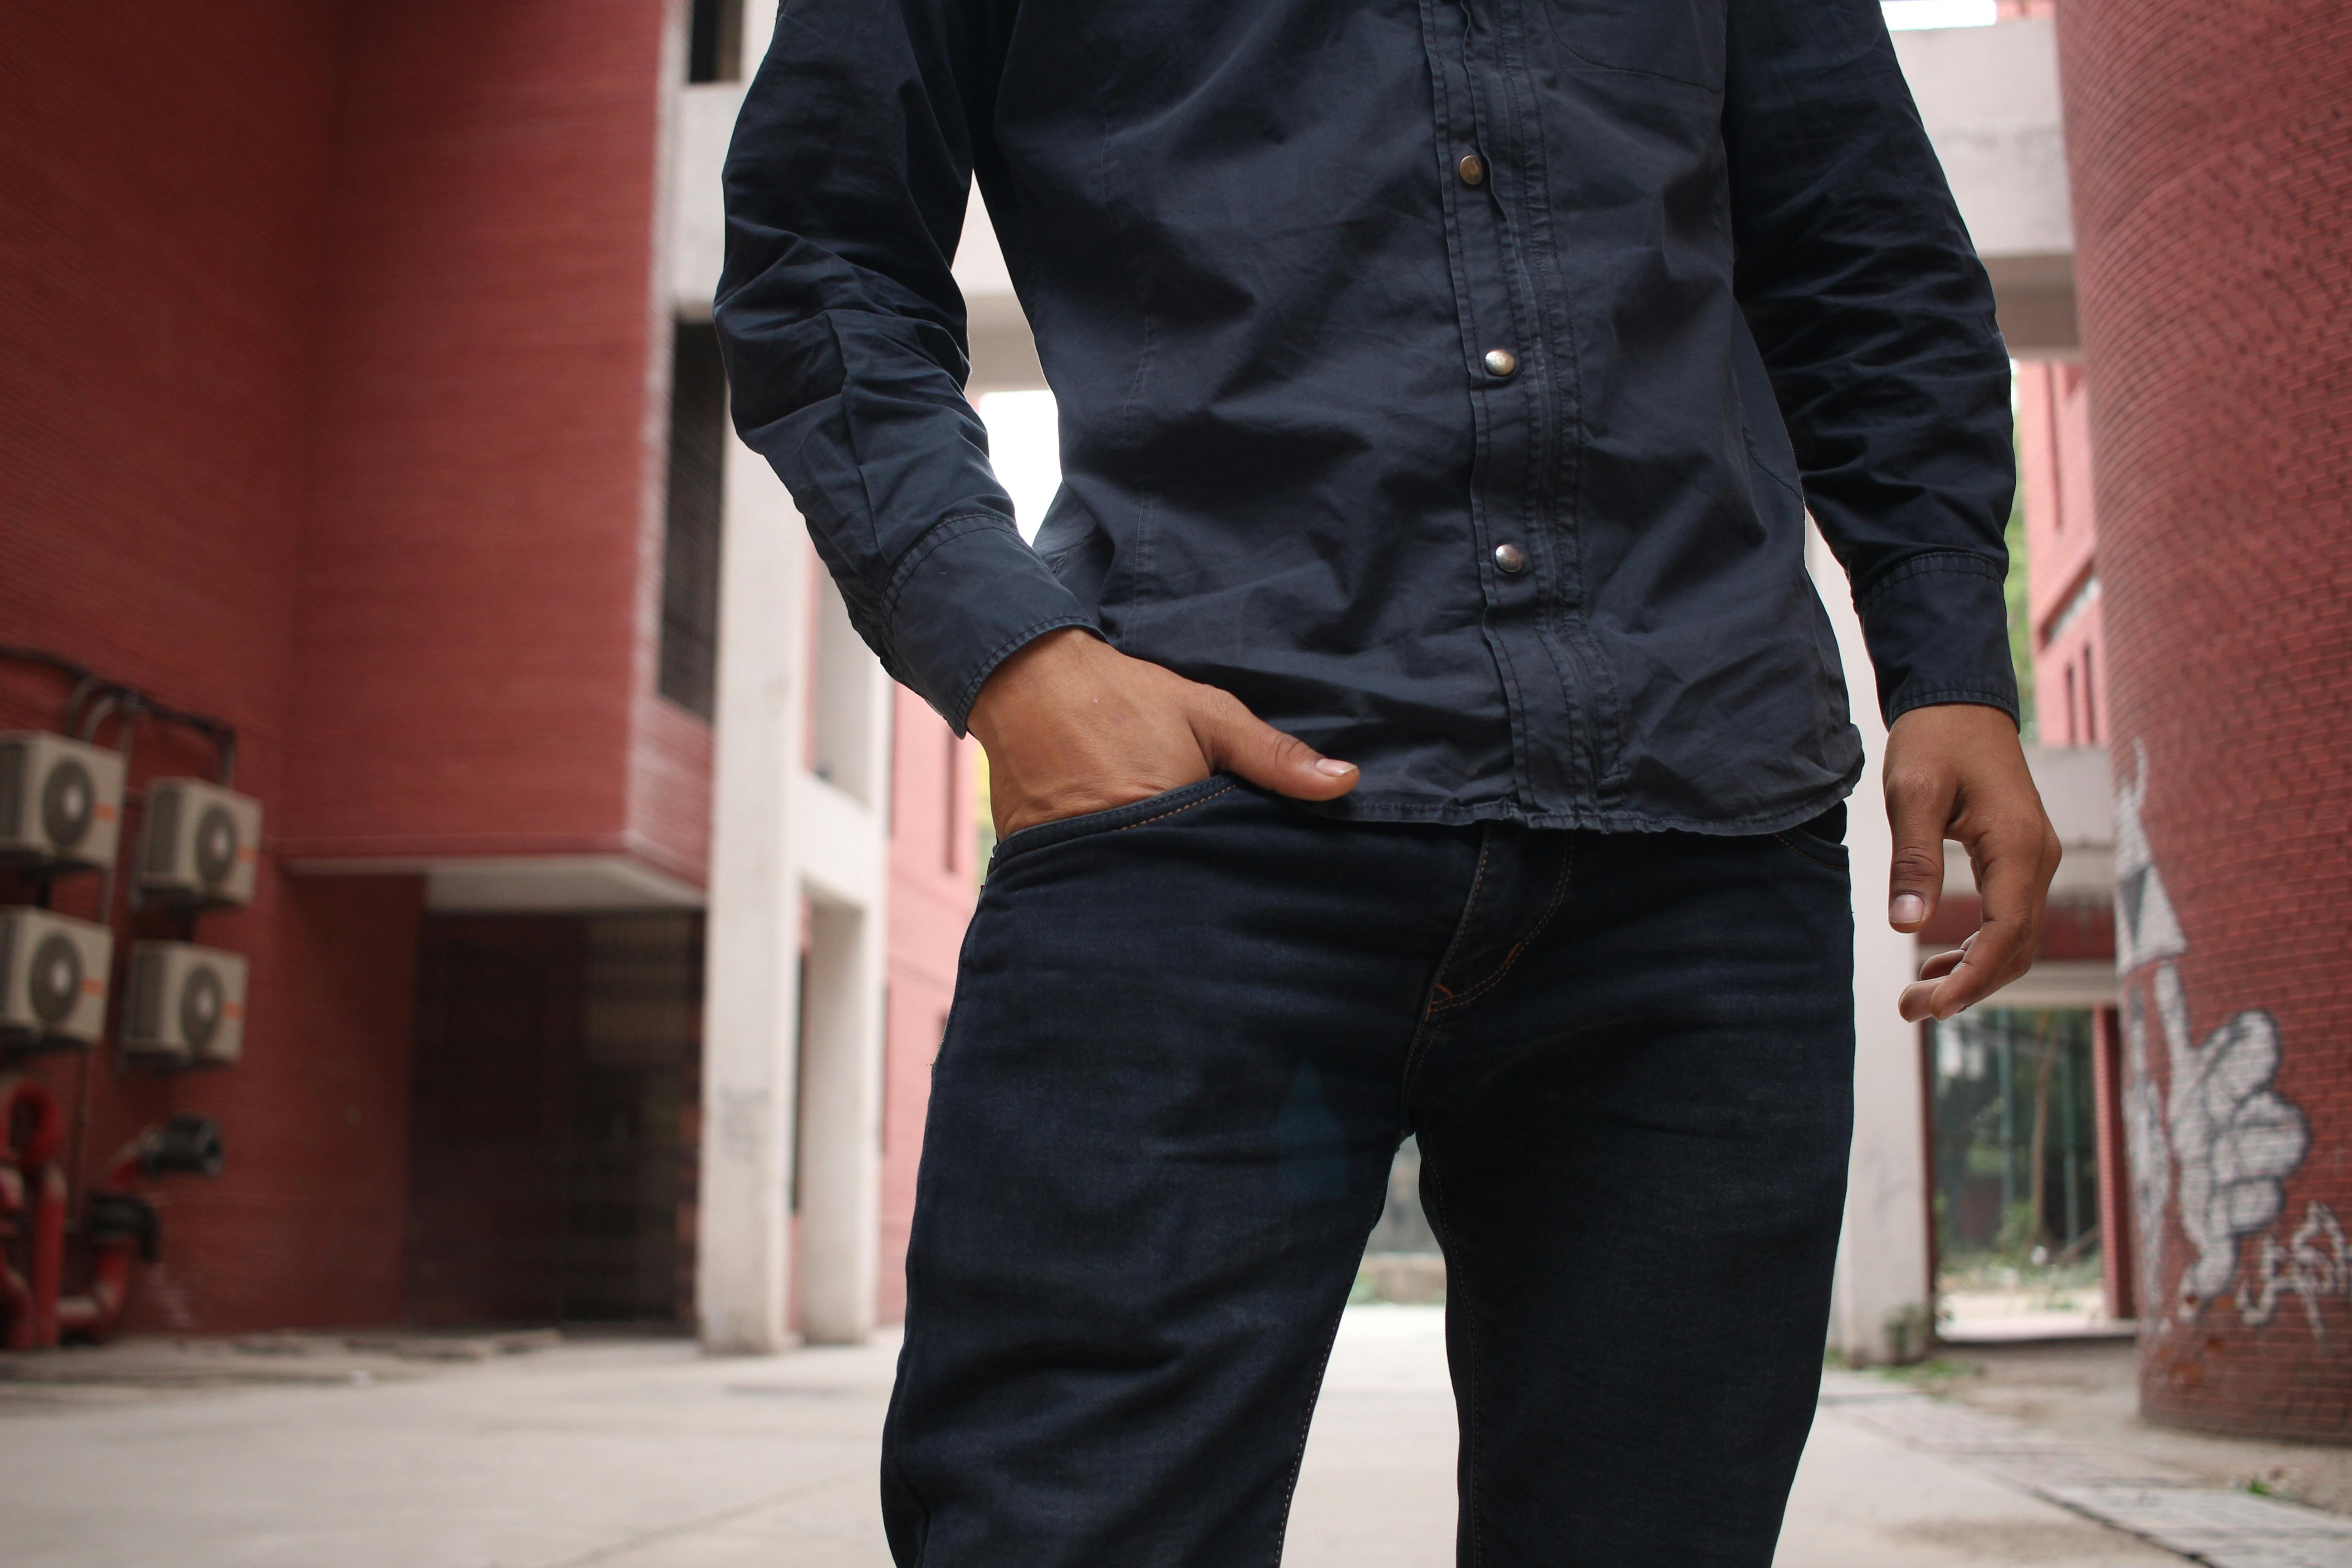 Black Jeans with Denim Shirt Outfits For Men (119 ideas & outfits) |  Lookastic